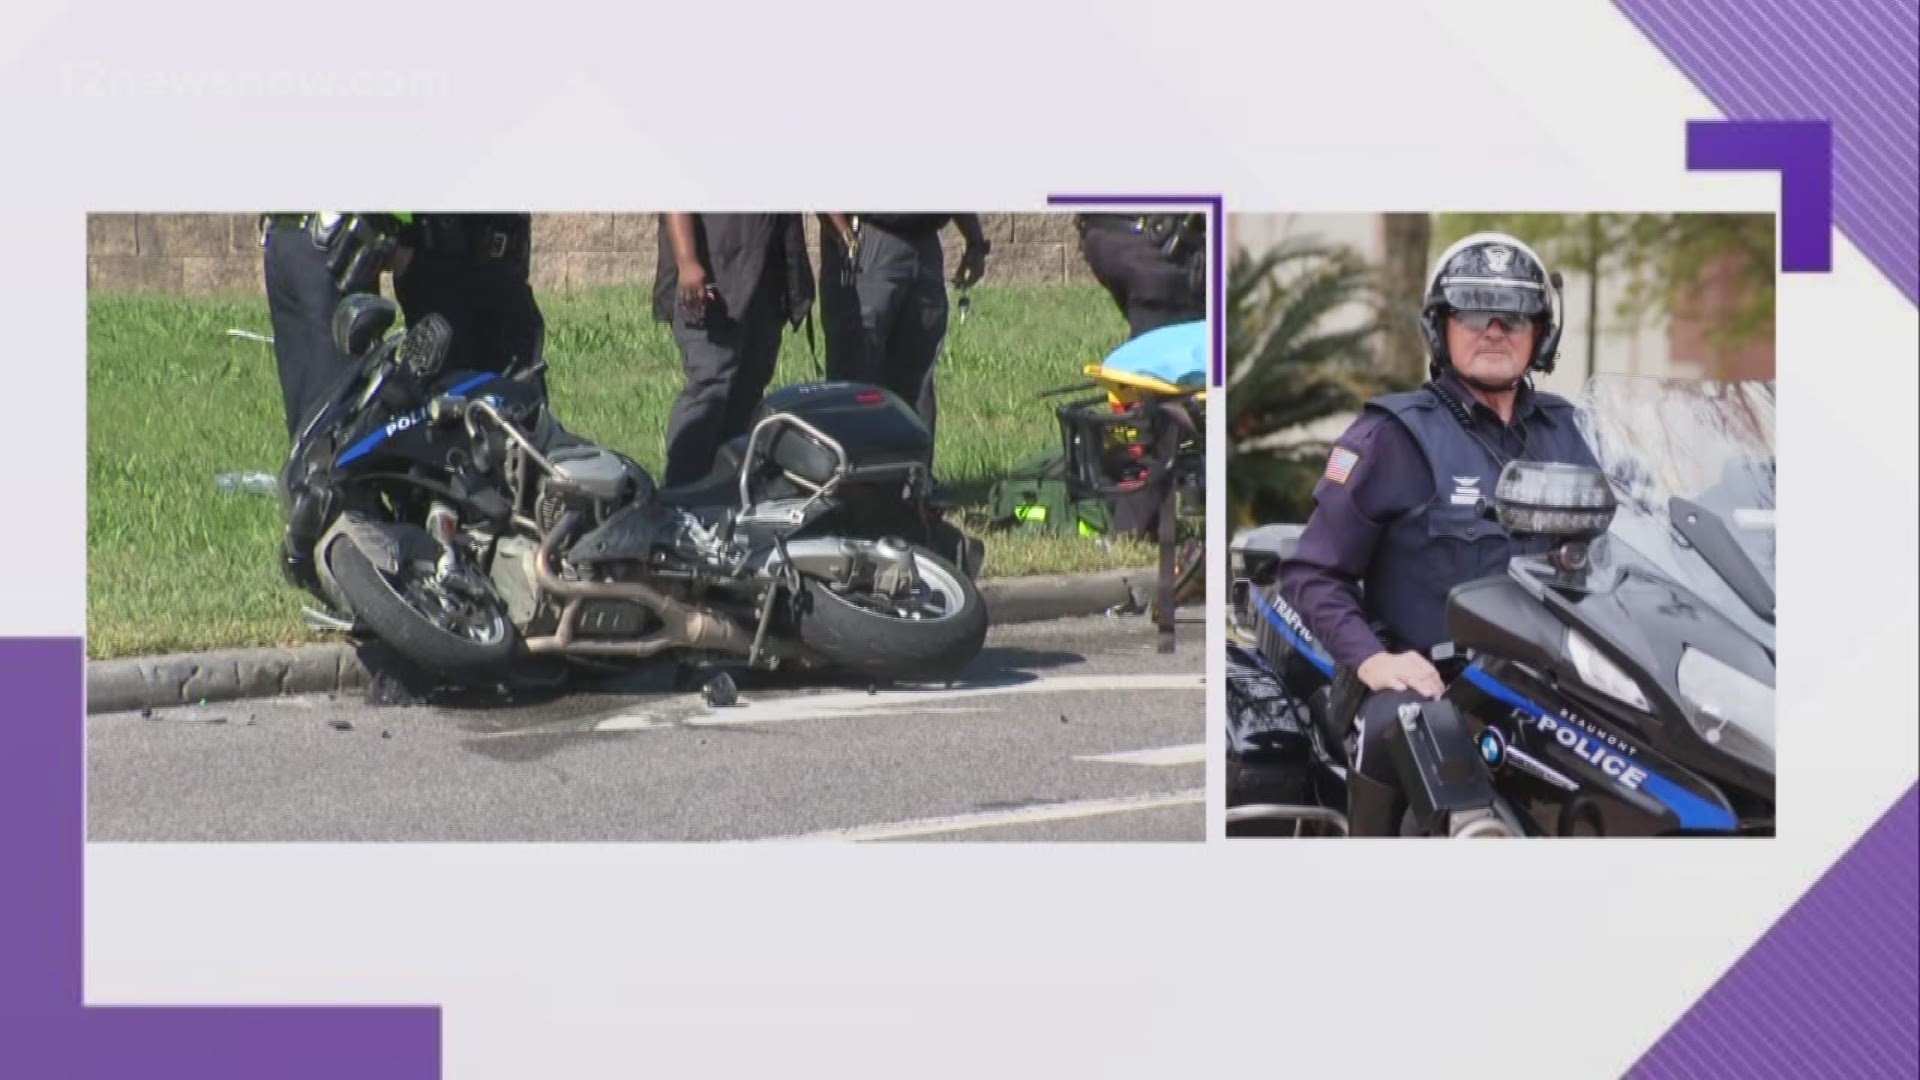 The wreck happened at about 11:35 a.m. when a Beaumont motor officer was traveling north on the Interstate 10 service Road approaching College street